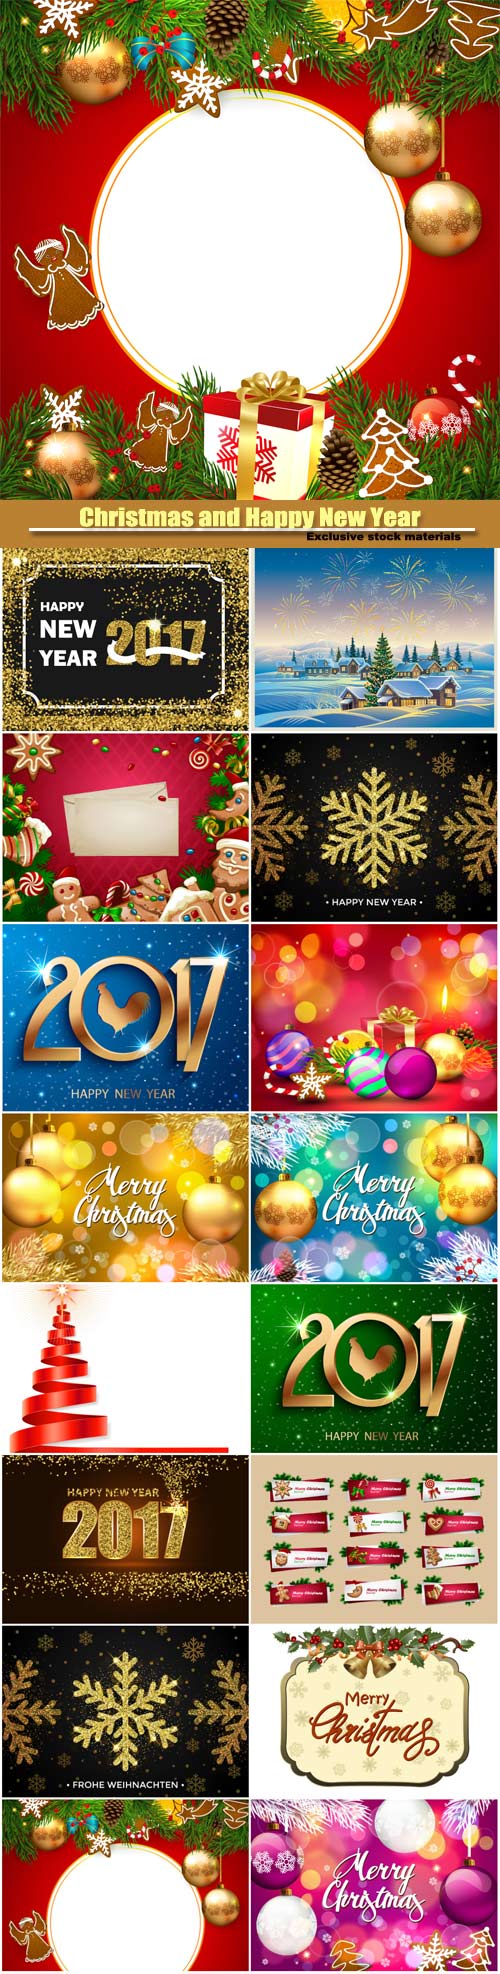 Christmas and Happy New Year 2017, vector party celebration poster